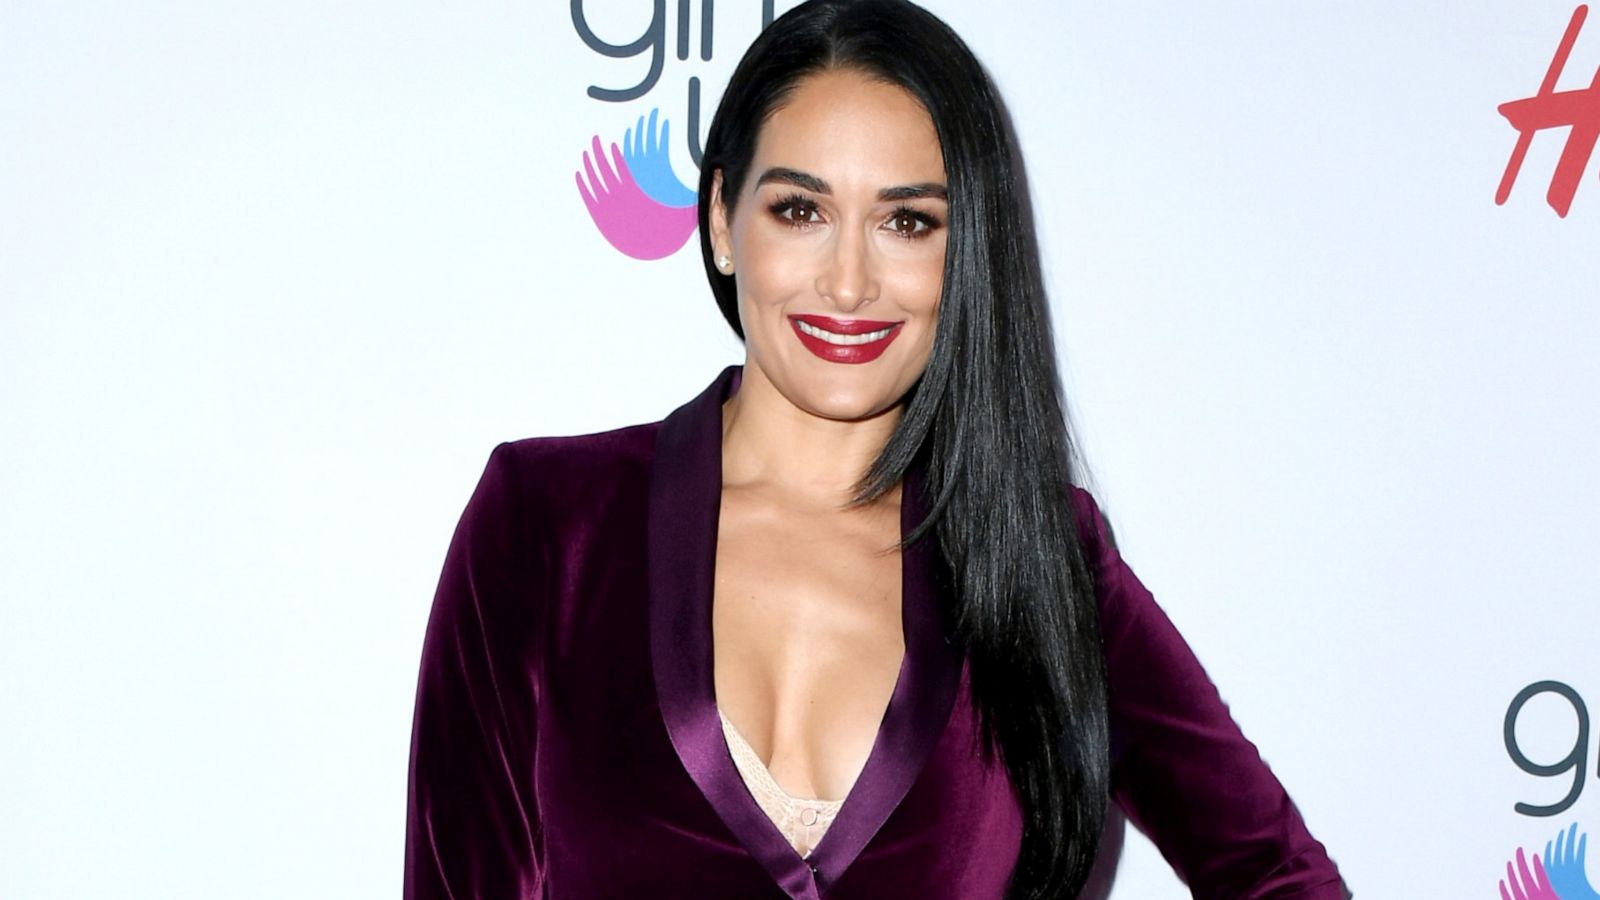 Pregnant Nikki Bella Seen Out for First Time Since Baby News